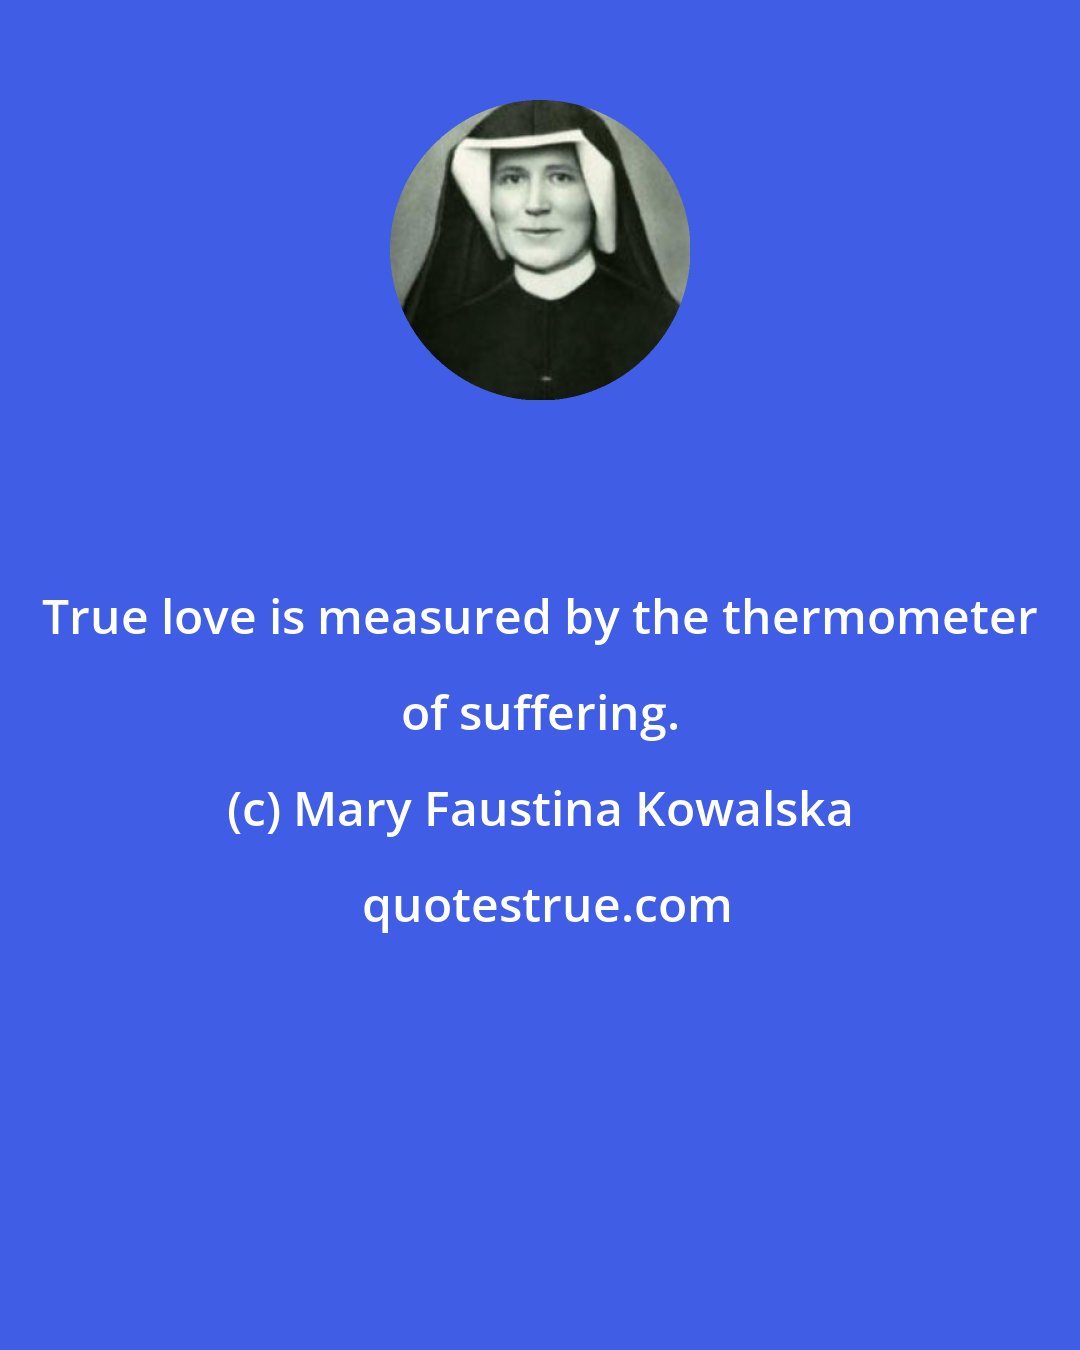 Mary Faustina Kowalska: True love is measured by the thermometer of suffering.